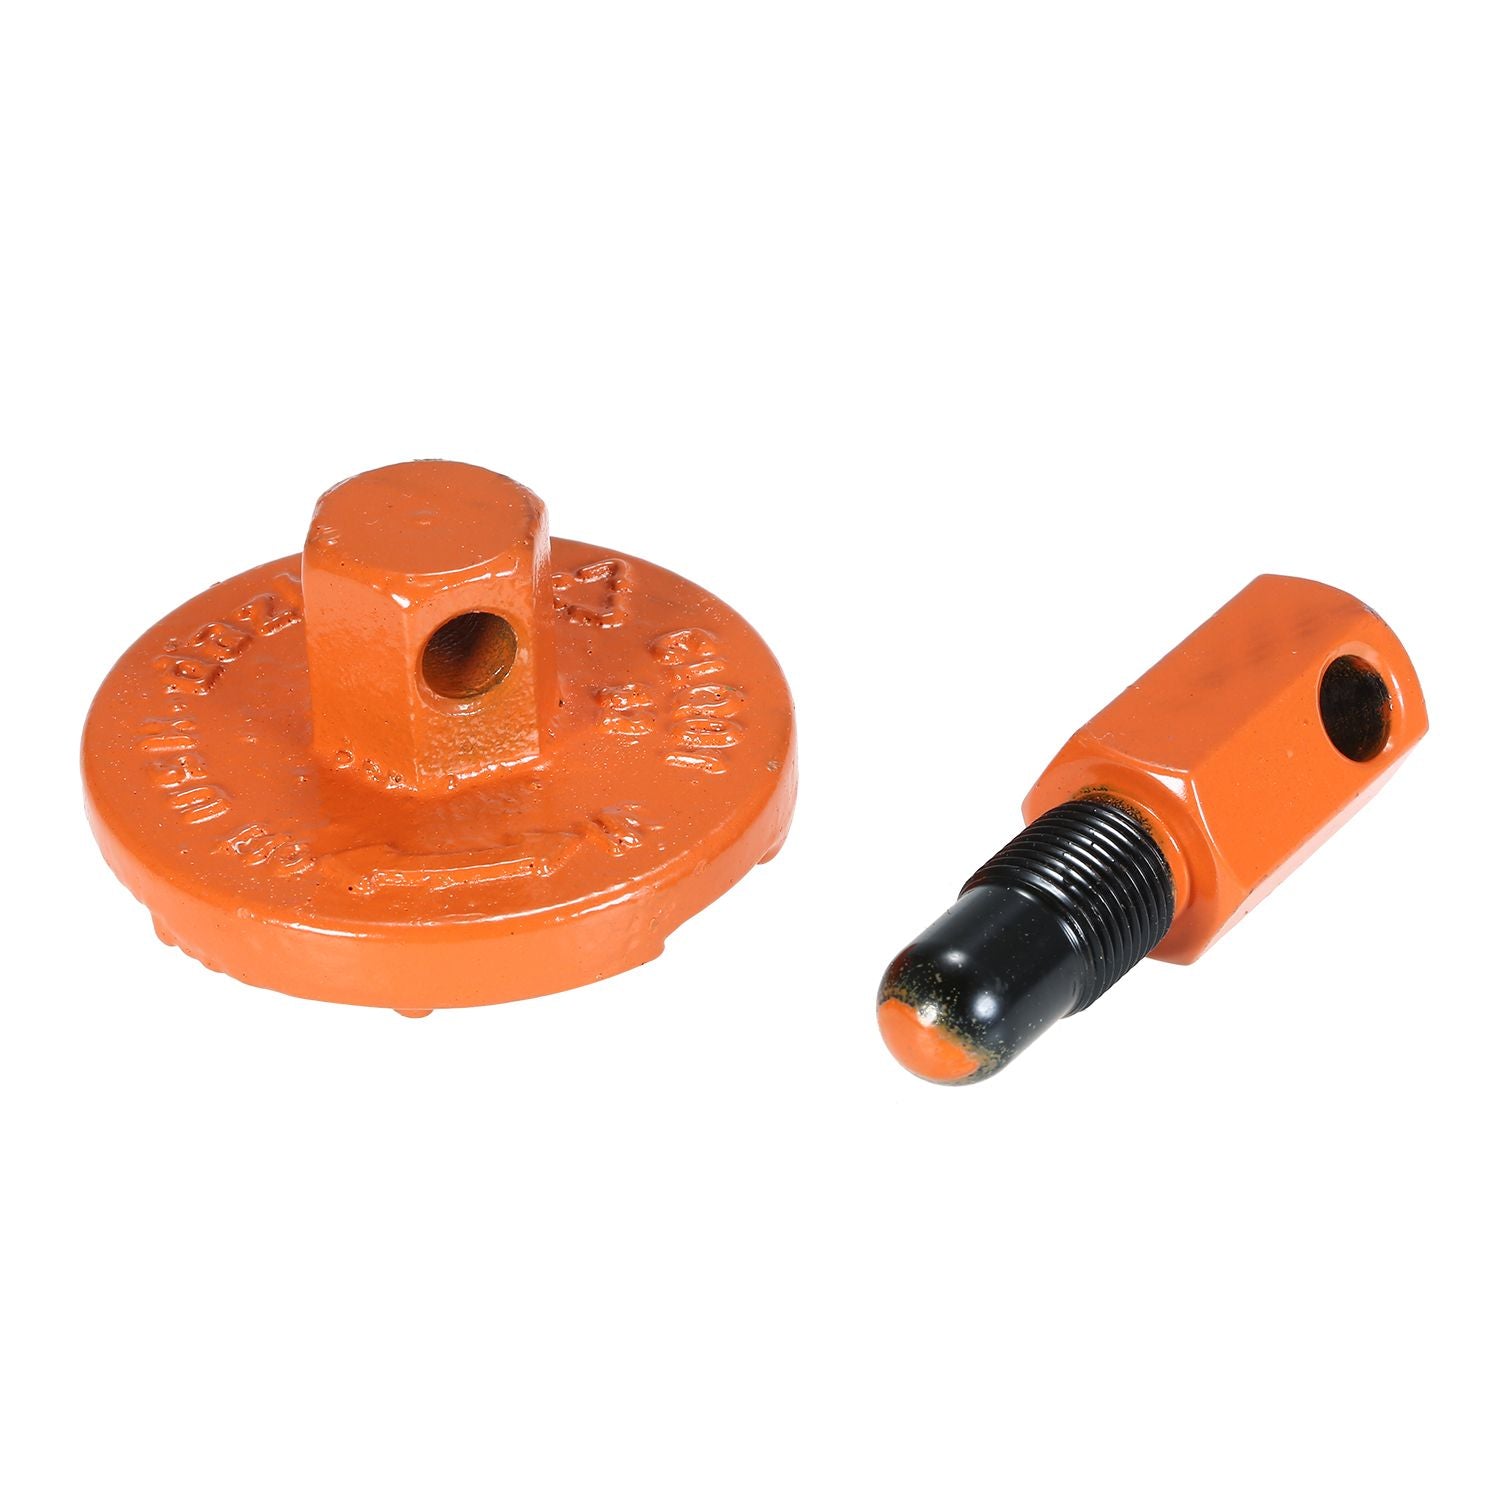 Chainsaw Clutch Removal Tools Universal Piston Stop Clutch